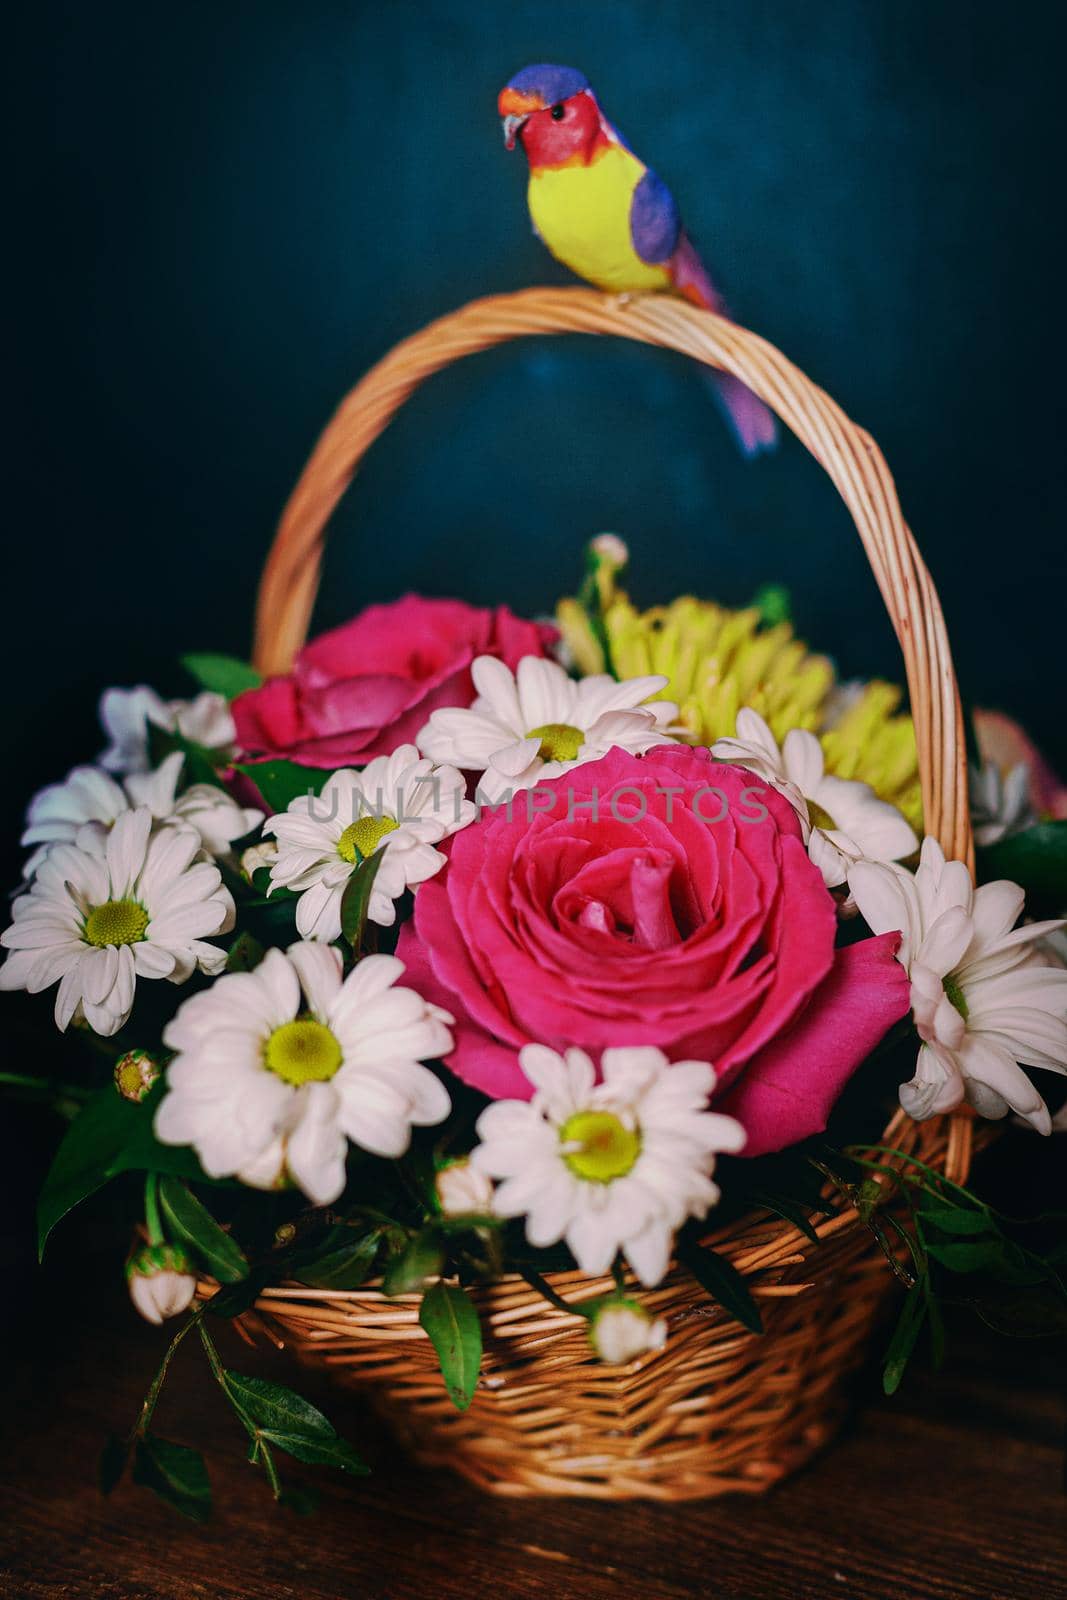 A bouquet of natural flowers in a wicker basket with a parrot on the handle. Red roses and white daisies. by SergeyPakulin